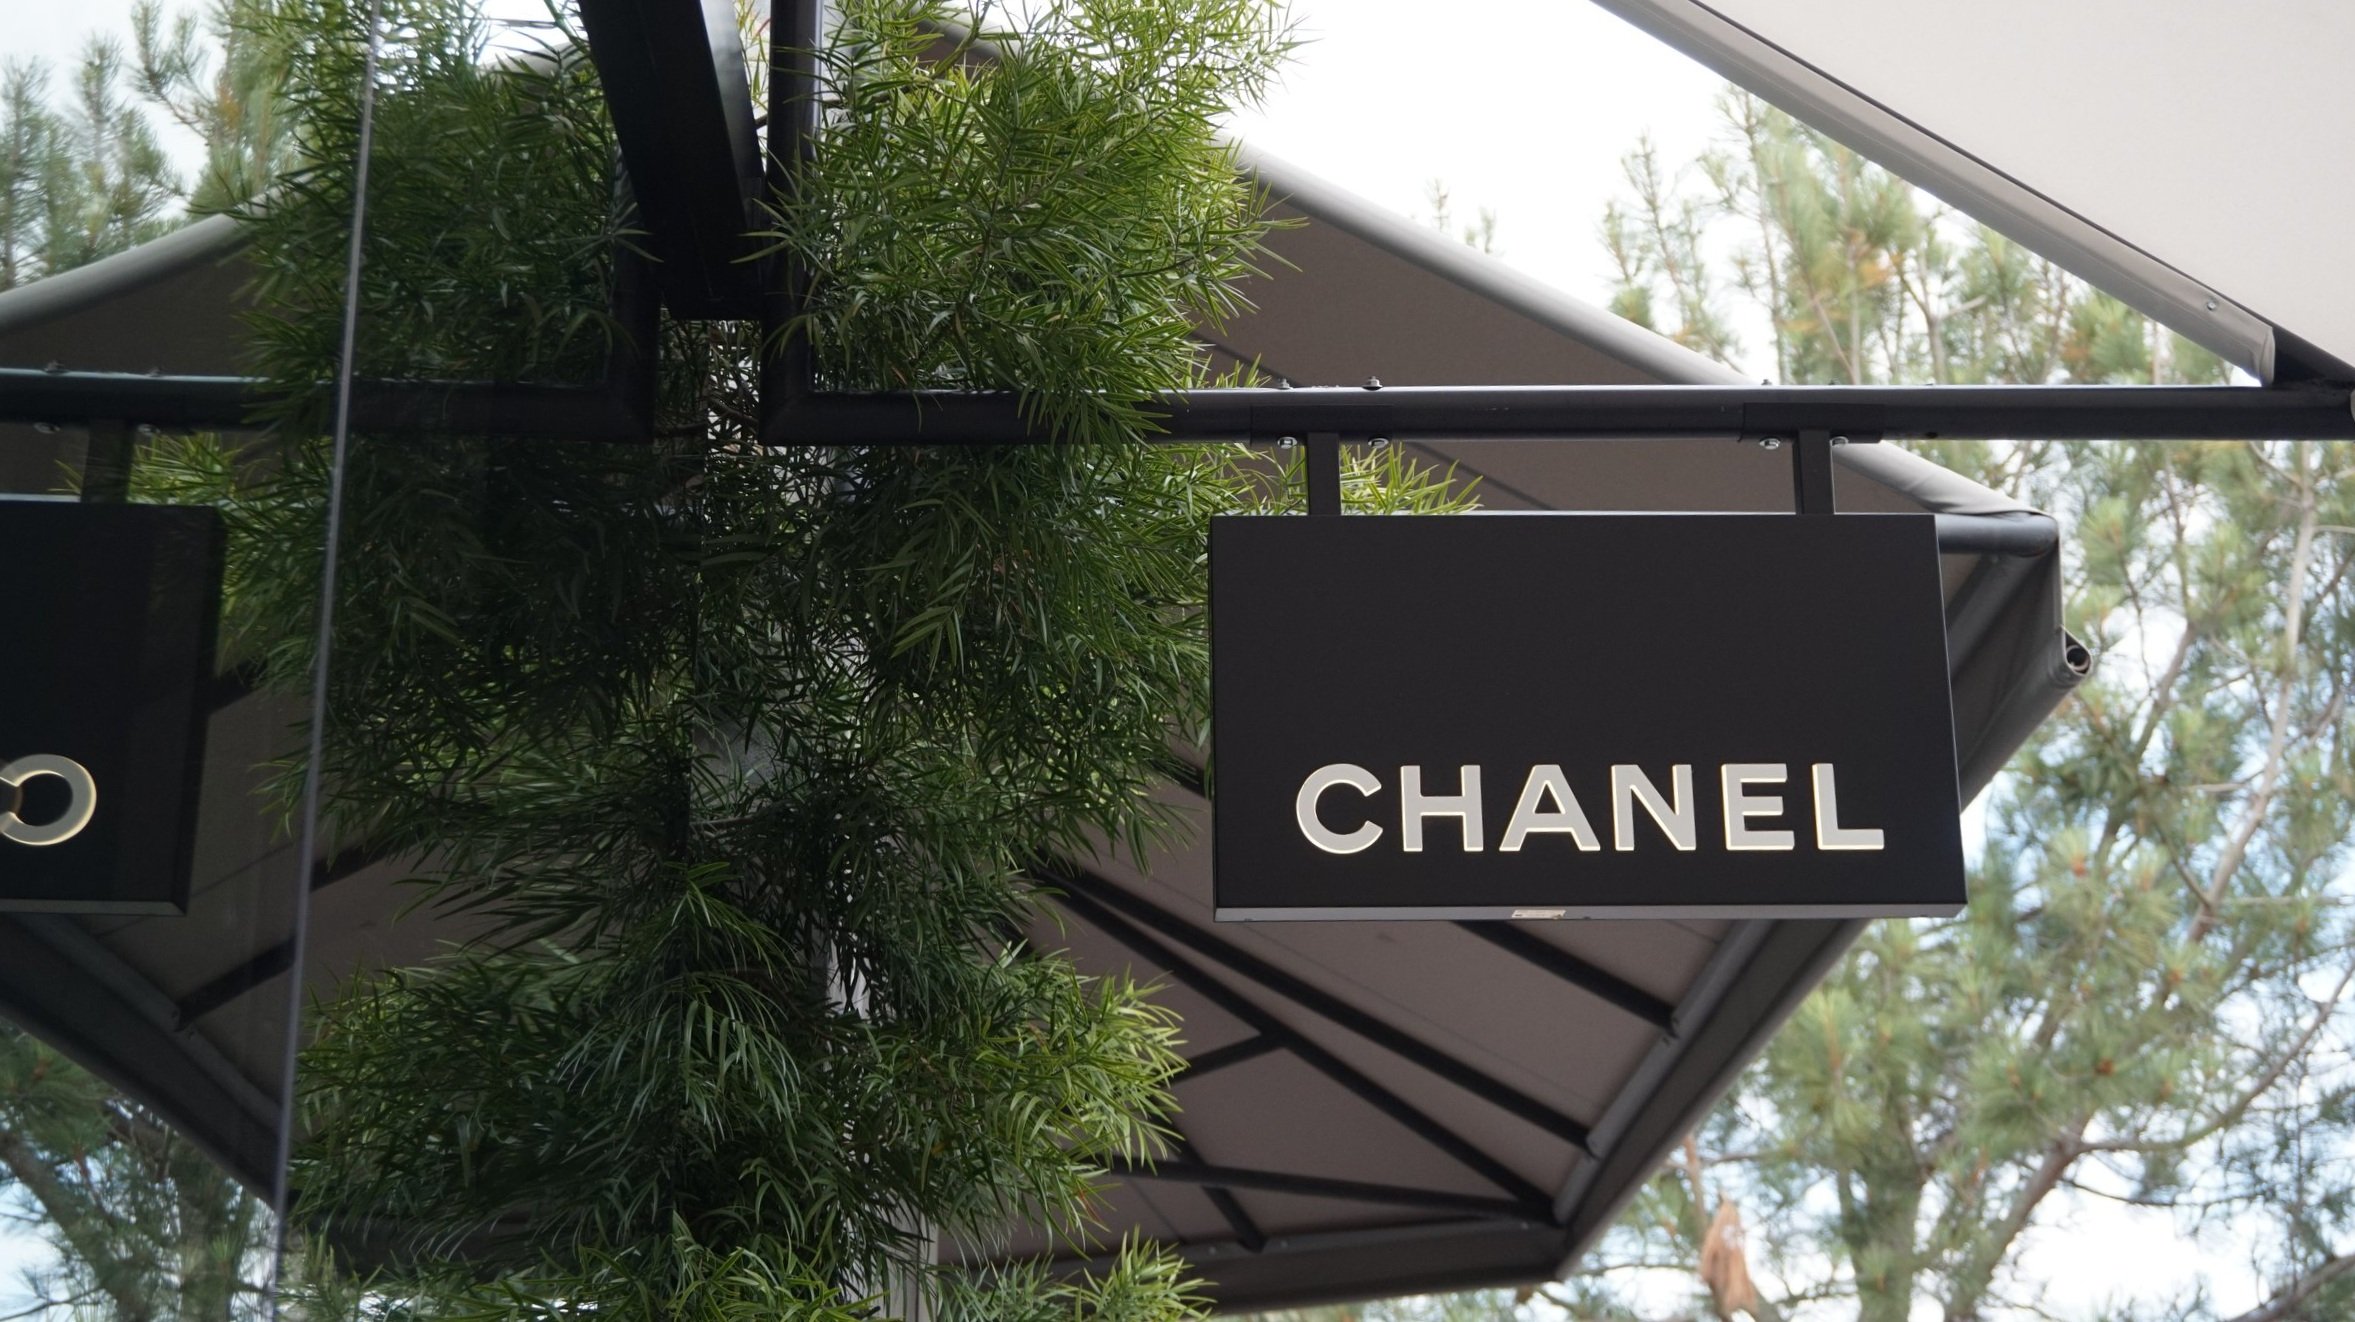 Wade Griffith — The new CHANEL boutique is located within Terminal